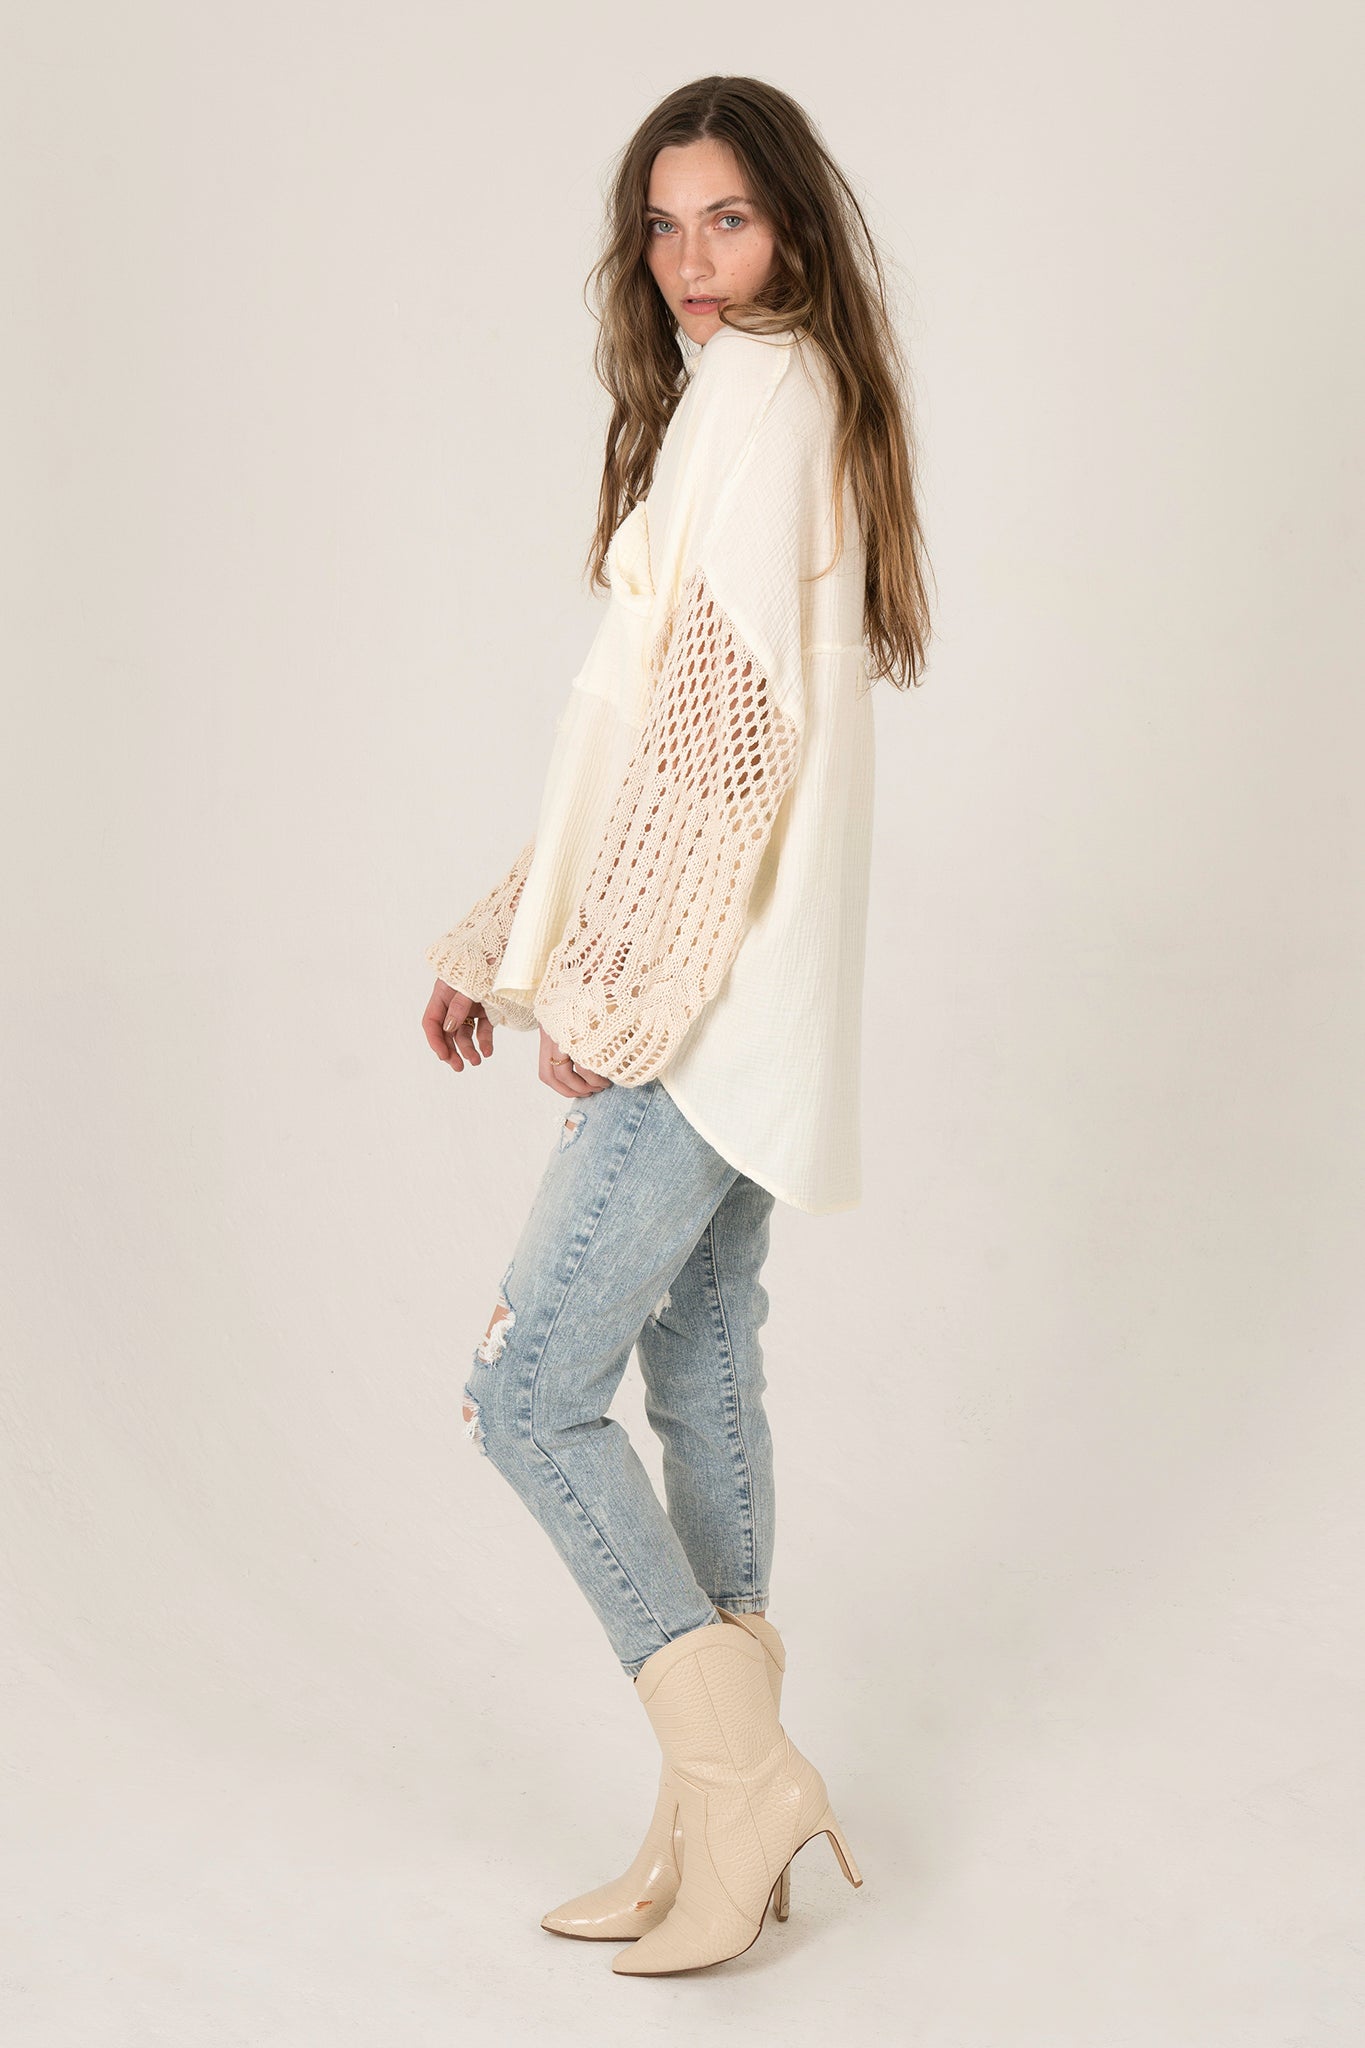 View 4 of Wisteria Cardigan in Cream, a Sweaters from Larrea Cove. Detail: .